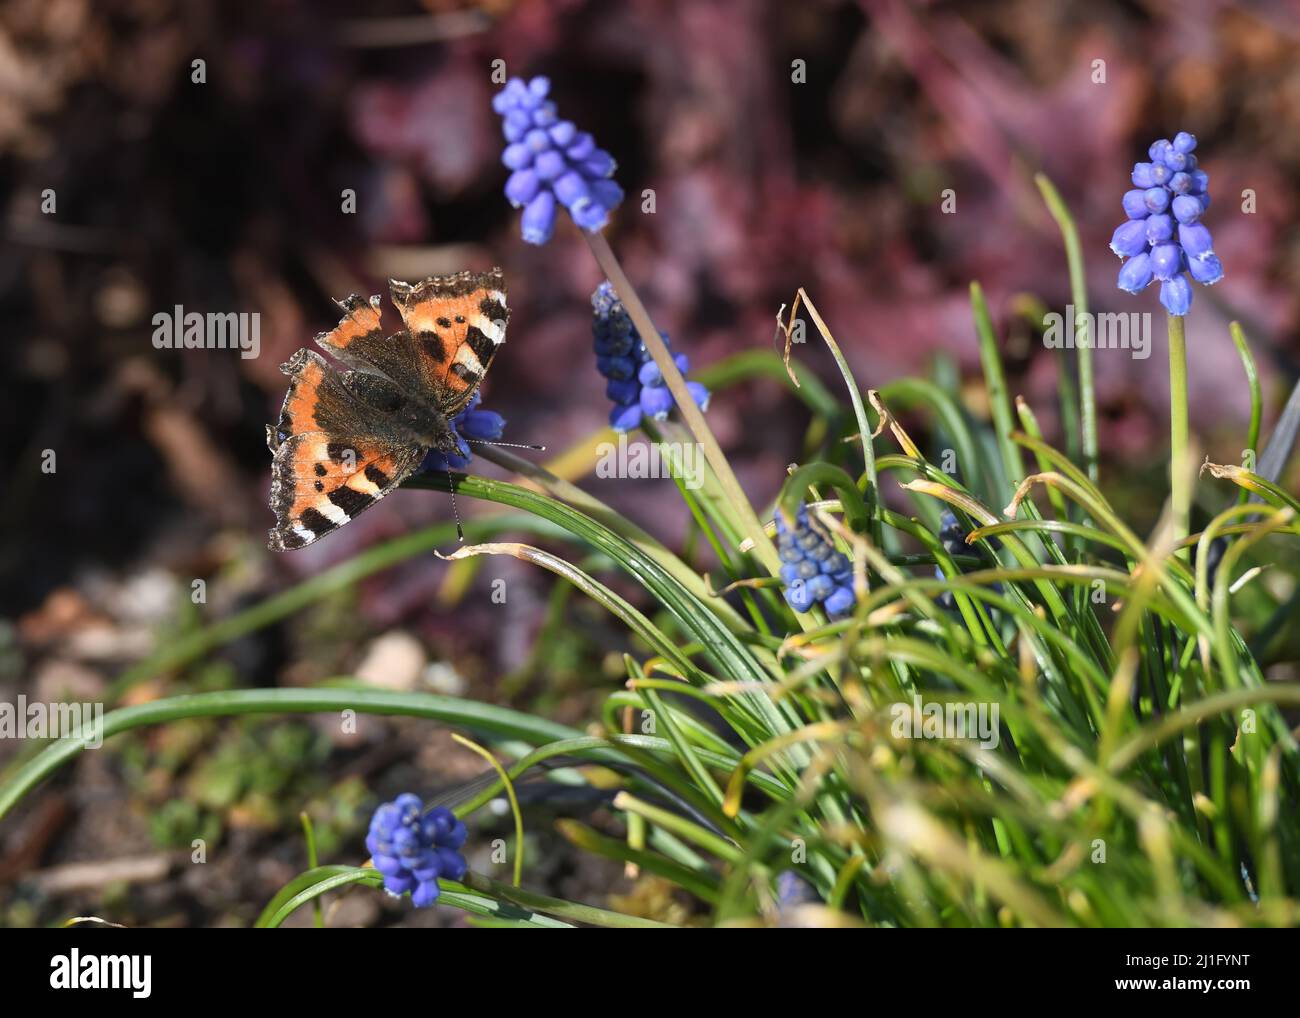 25th, March, 2022. Glasgow, Scotland, UK. Warm Spring weather. A small tortoiseshell butterfly brings a spot of added colour to the Spring flowering Muscari flowers in the warm Glasgow sunshine. Credit, Douglas Carr/Alamy Live News. Stock Photo